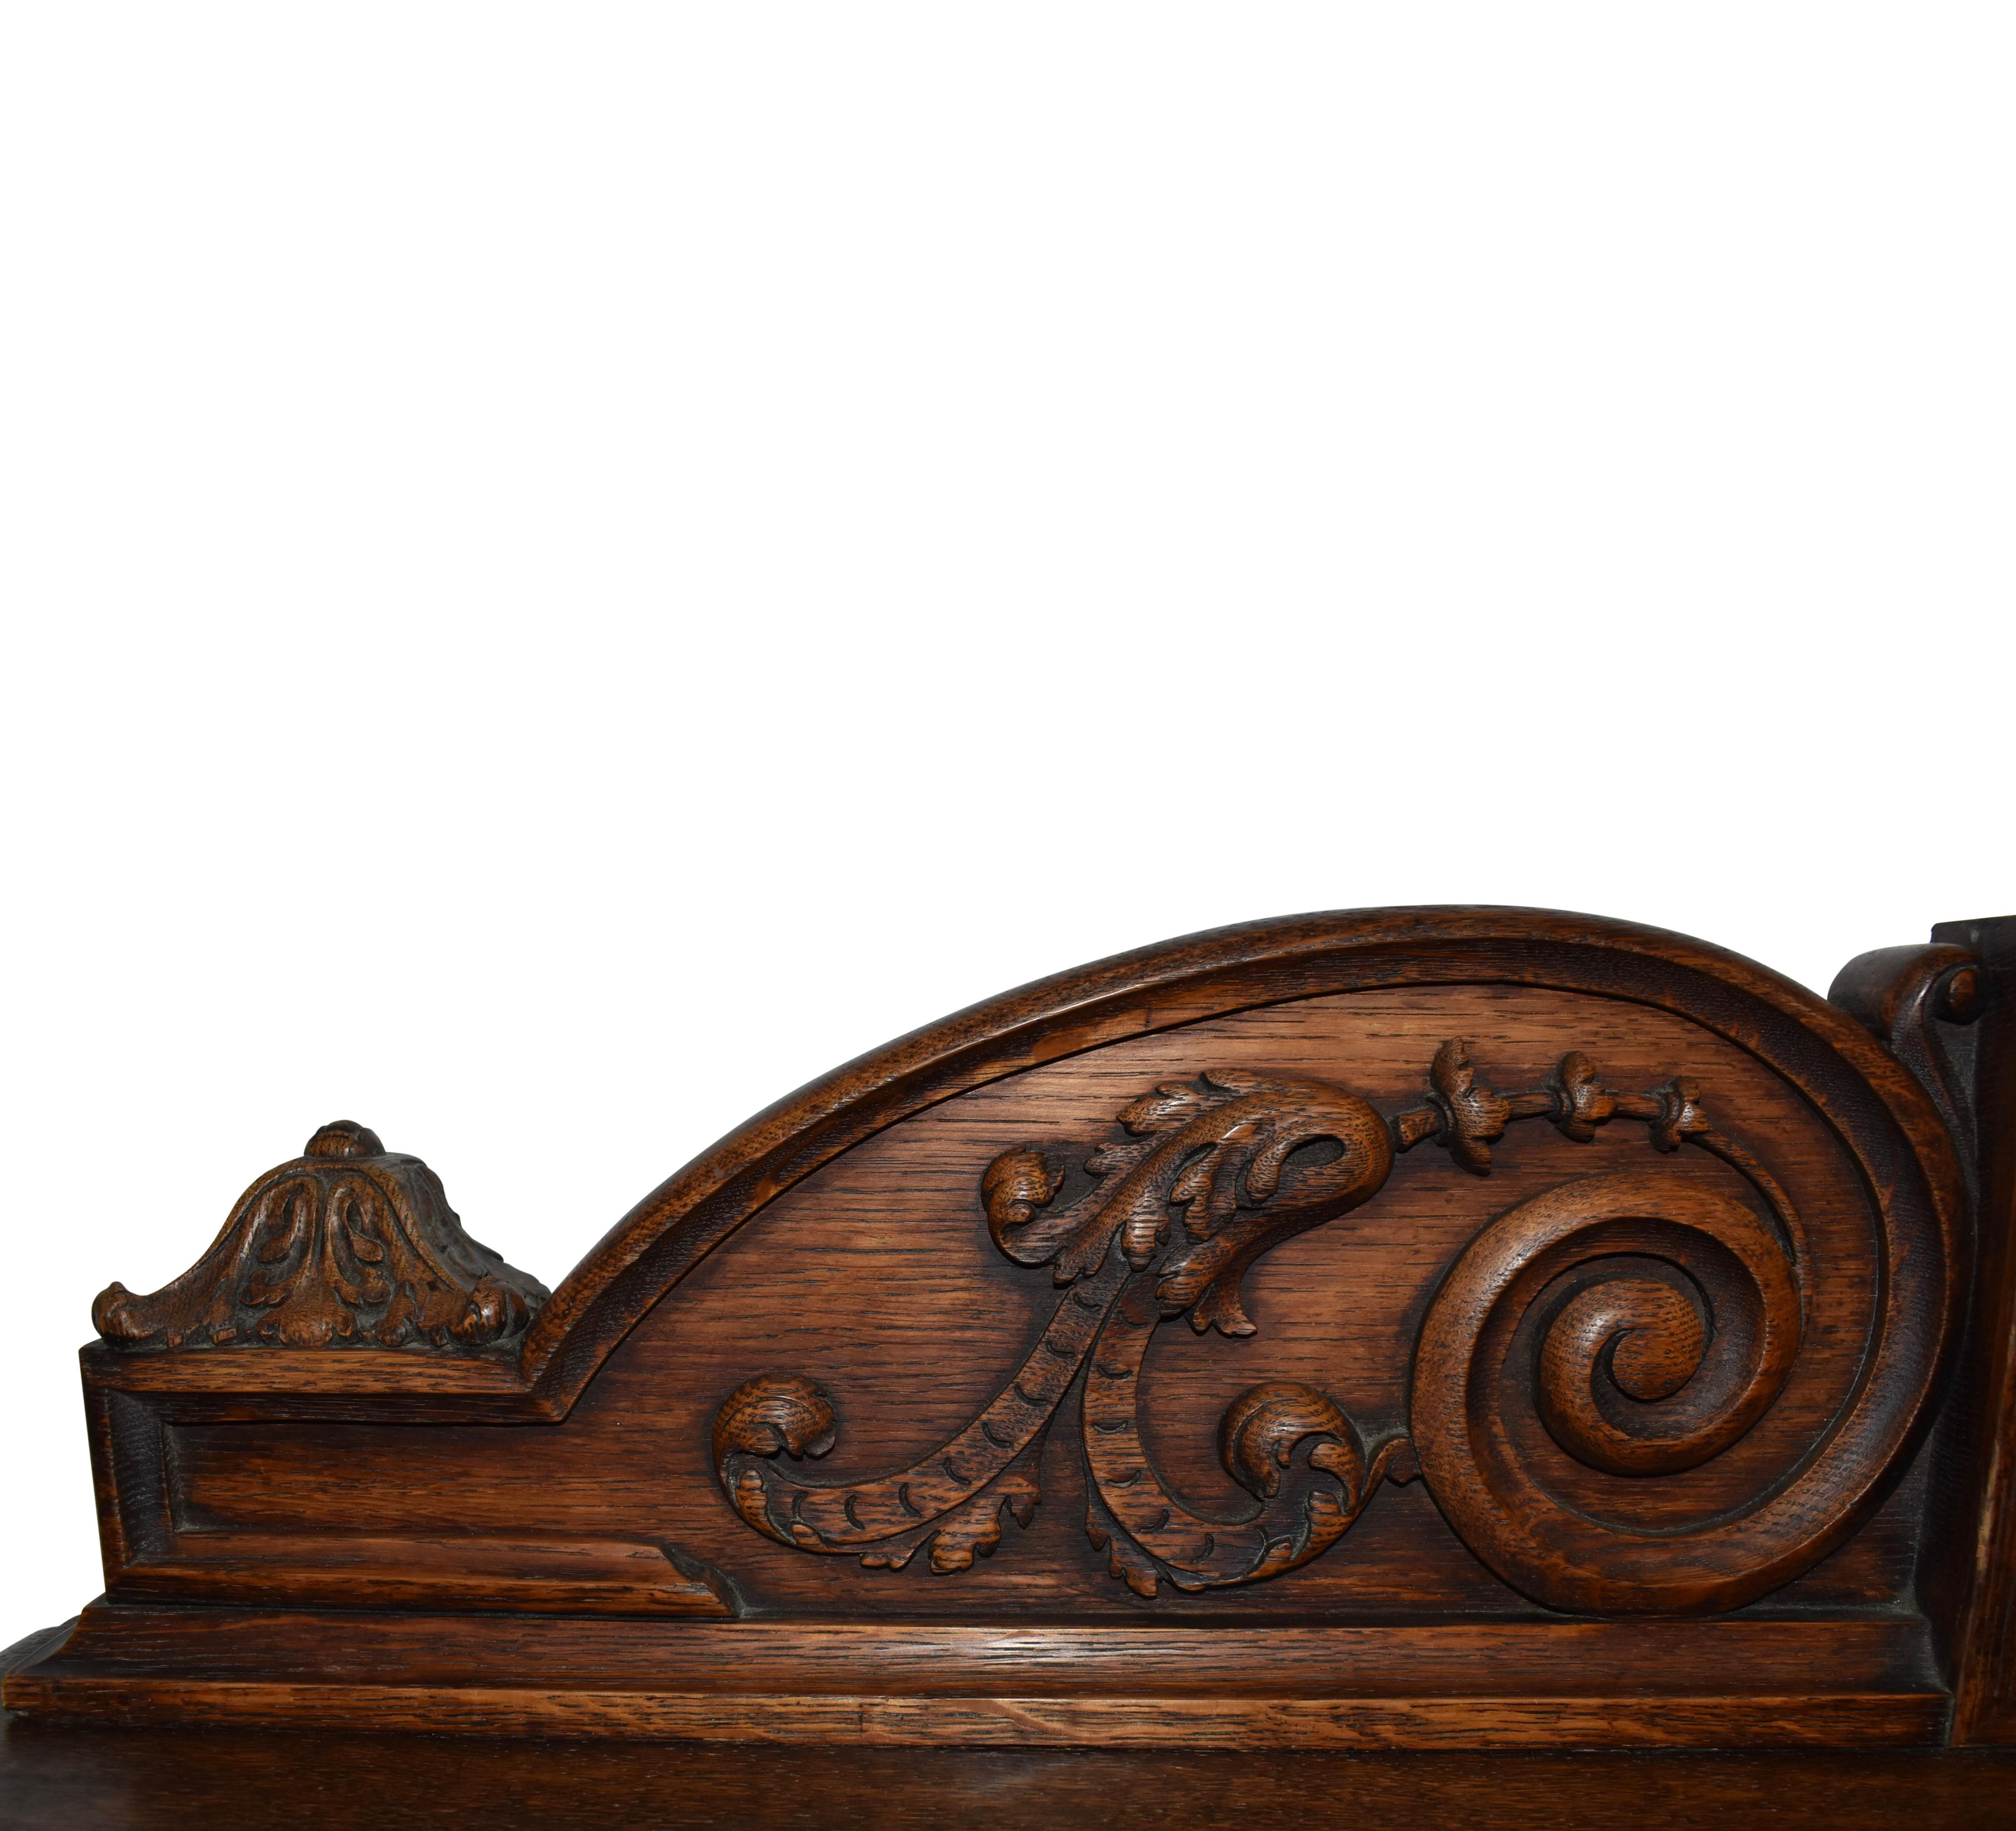 Carved Oak Server Buffet with Decorative Putti Copper Panel In Good Condition For Sale In Evergreen, CO